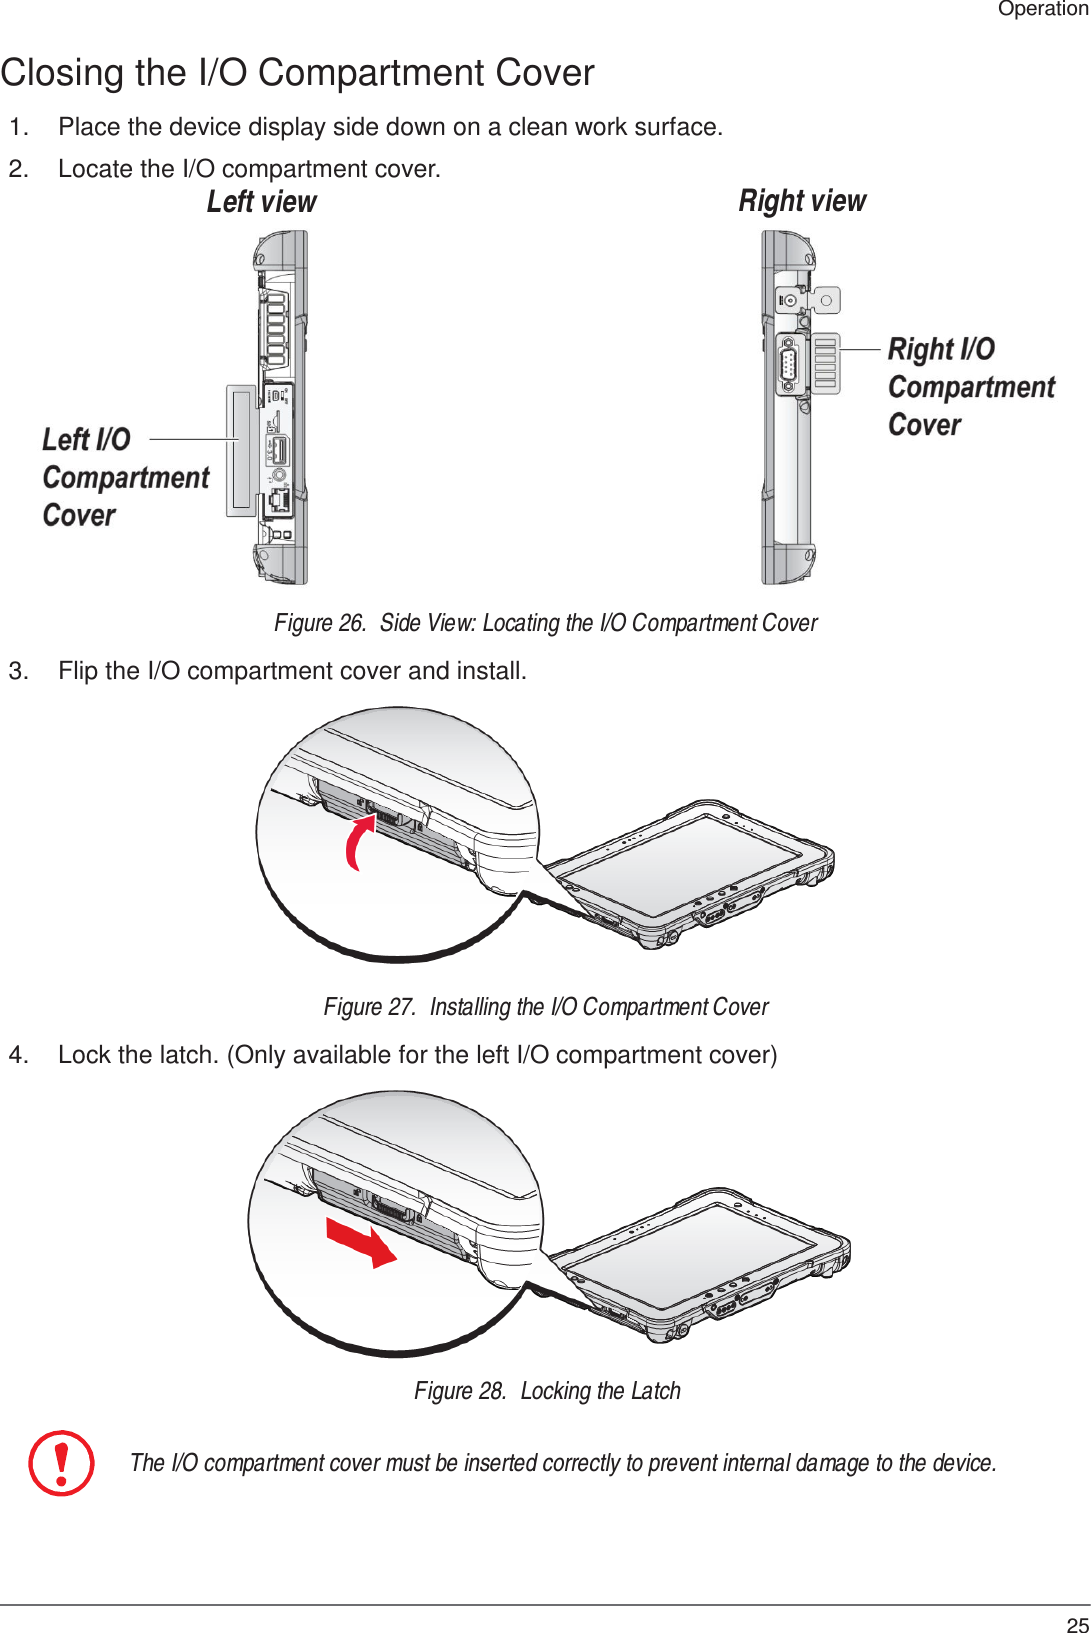 25 Operation       Closing the I/O Compartment Cover  1.  Place the device display side down on a clean work surface.  2.  Locate the I/O compartment cover. Left view       Right view                  Figure 26.  Side View: Locating the I/O Compartment Cover  3.  Flip the I/O compartment cover and install.                Figure 27.  Installing the I/O Compartment Cover  4.  Lock the latch. (Only available for the left I/O compartment cover)                Figure 28.  Locking the Latch   The I/O compartment cover must be inserted correctly to prevent internal damage to the device. 